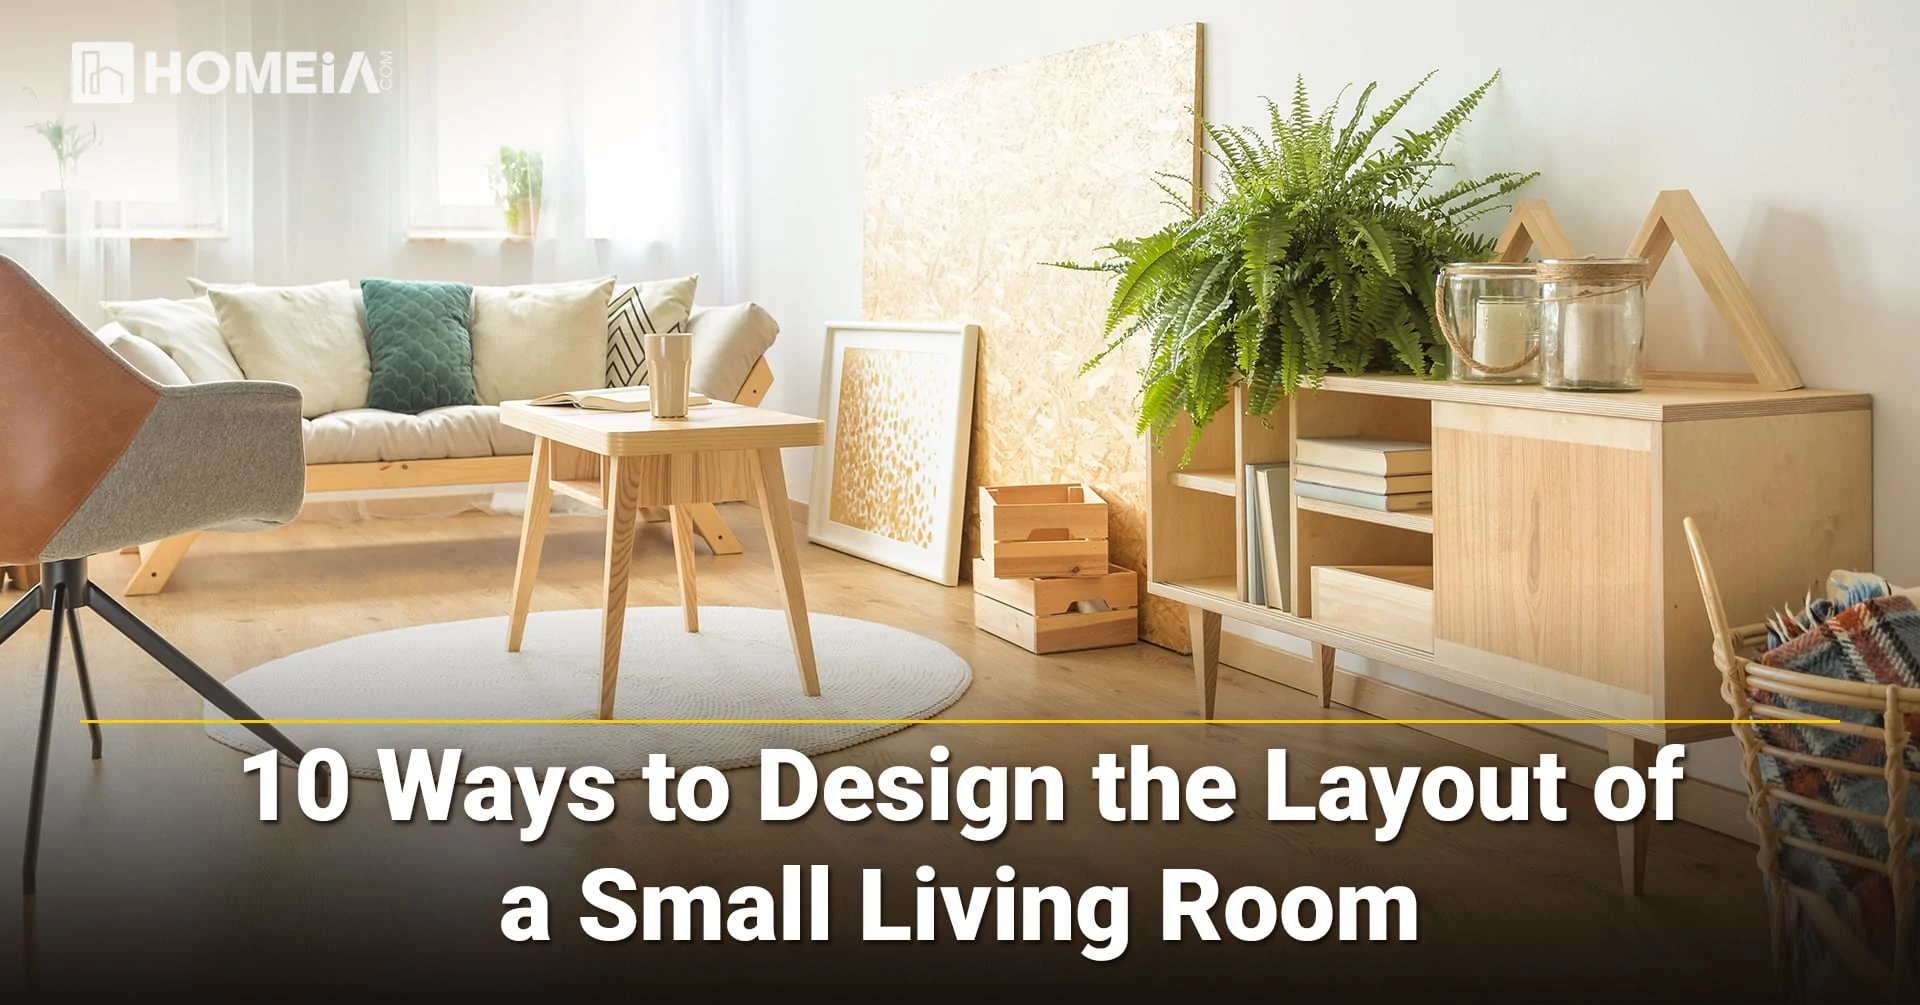 10 Ways to Design the Layout of a Small Living Room